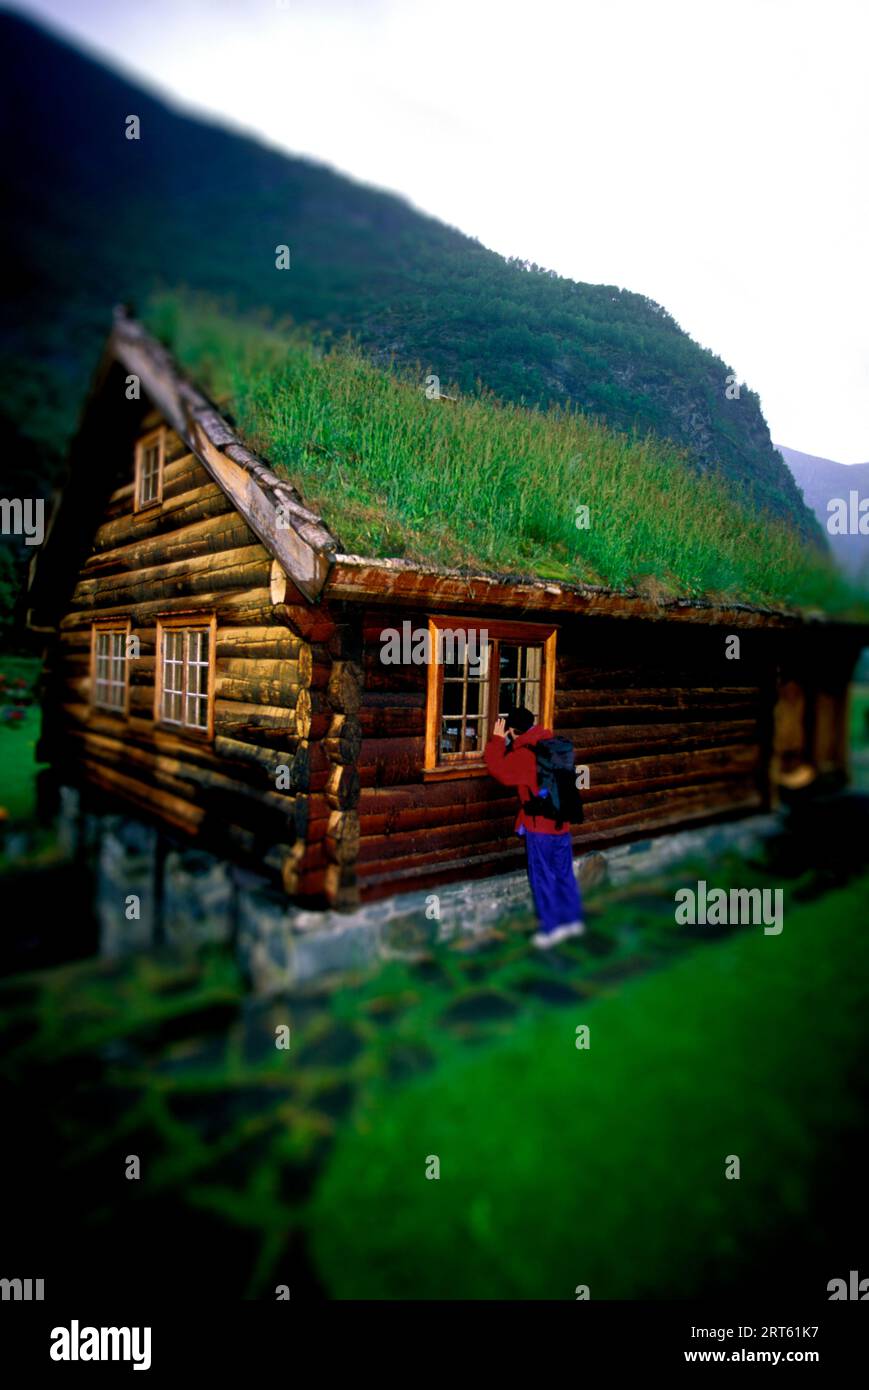 Woman peeks into grass roofed log home, Norway. Stock Photo